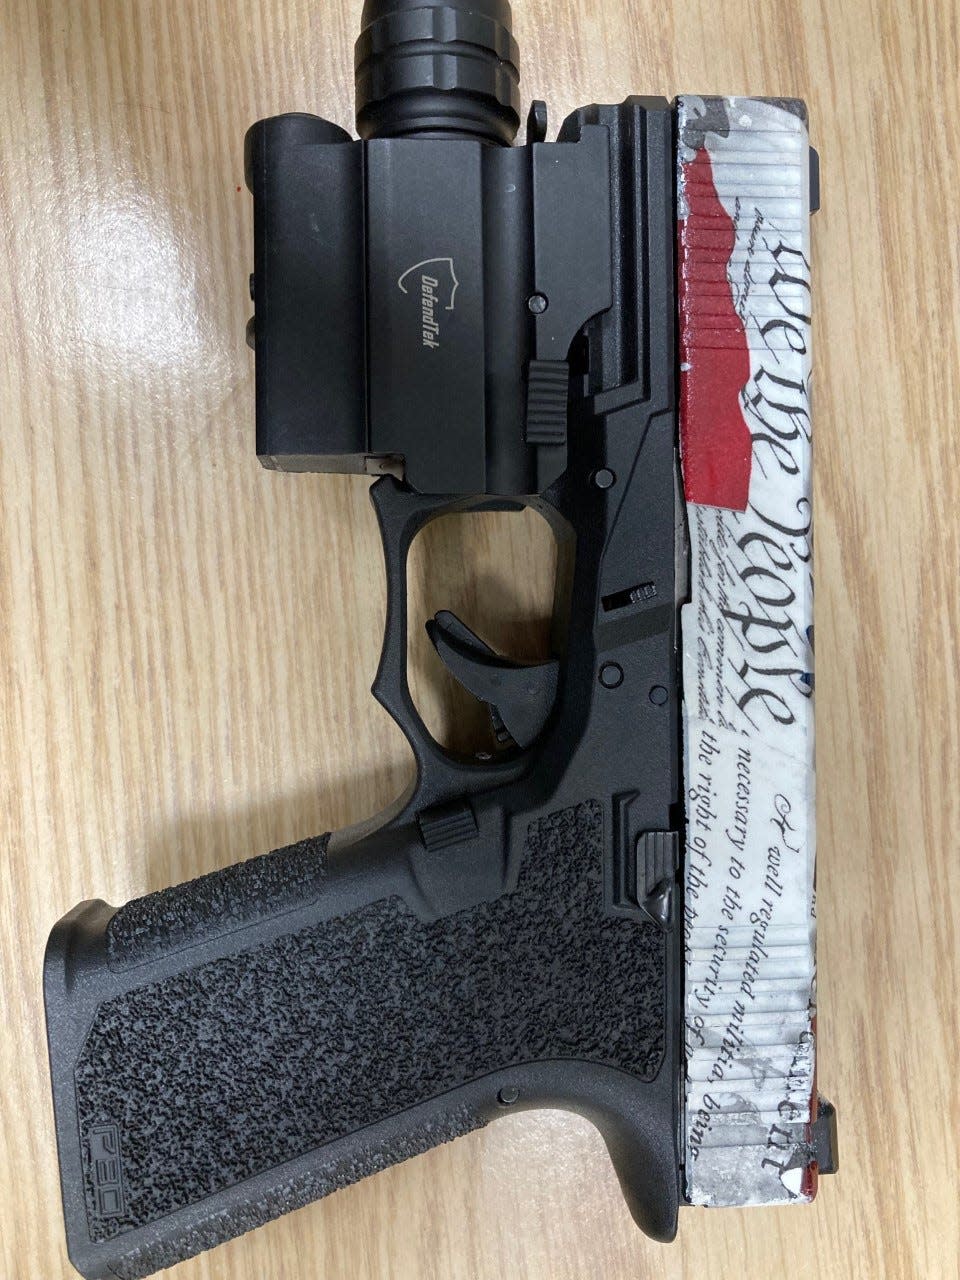 Police believe this gun, confiscated along with drugs during a traffic stop last week, is an unregistered, untraceable "ghost gun."